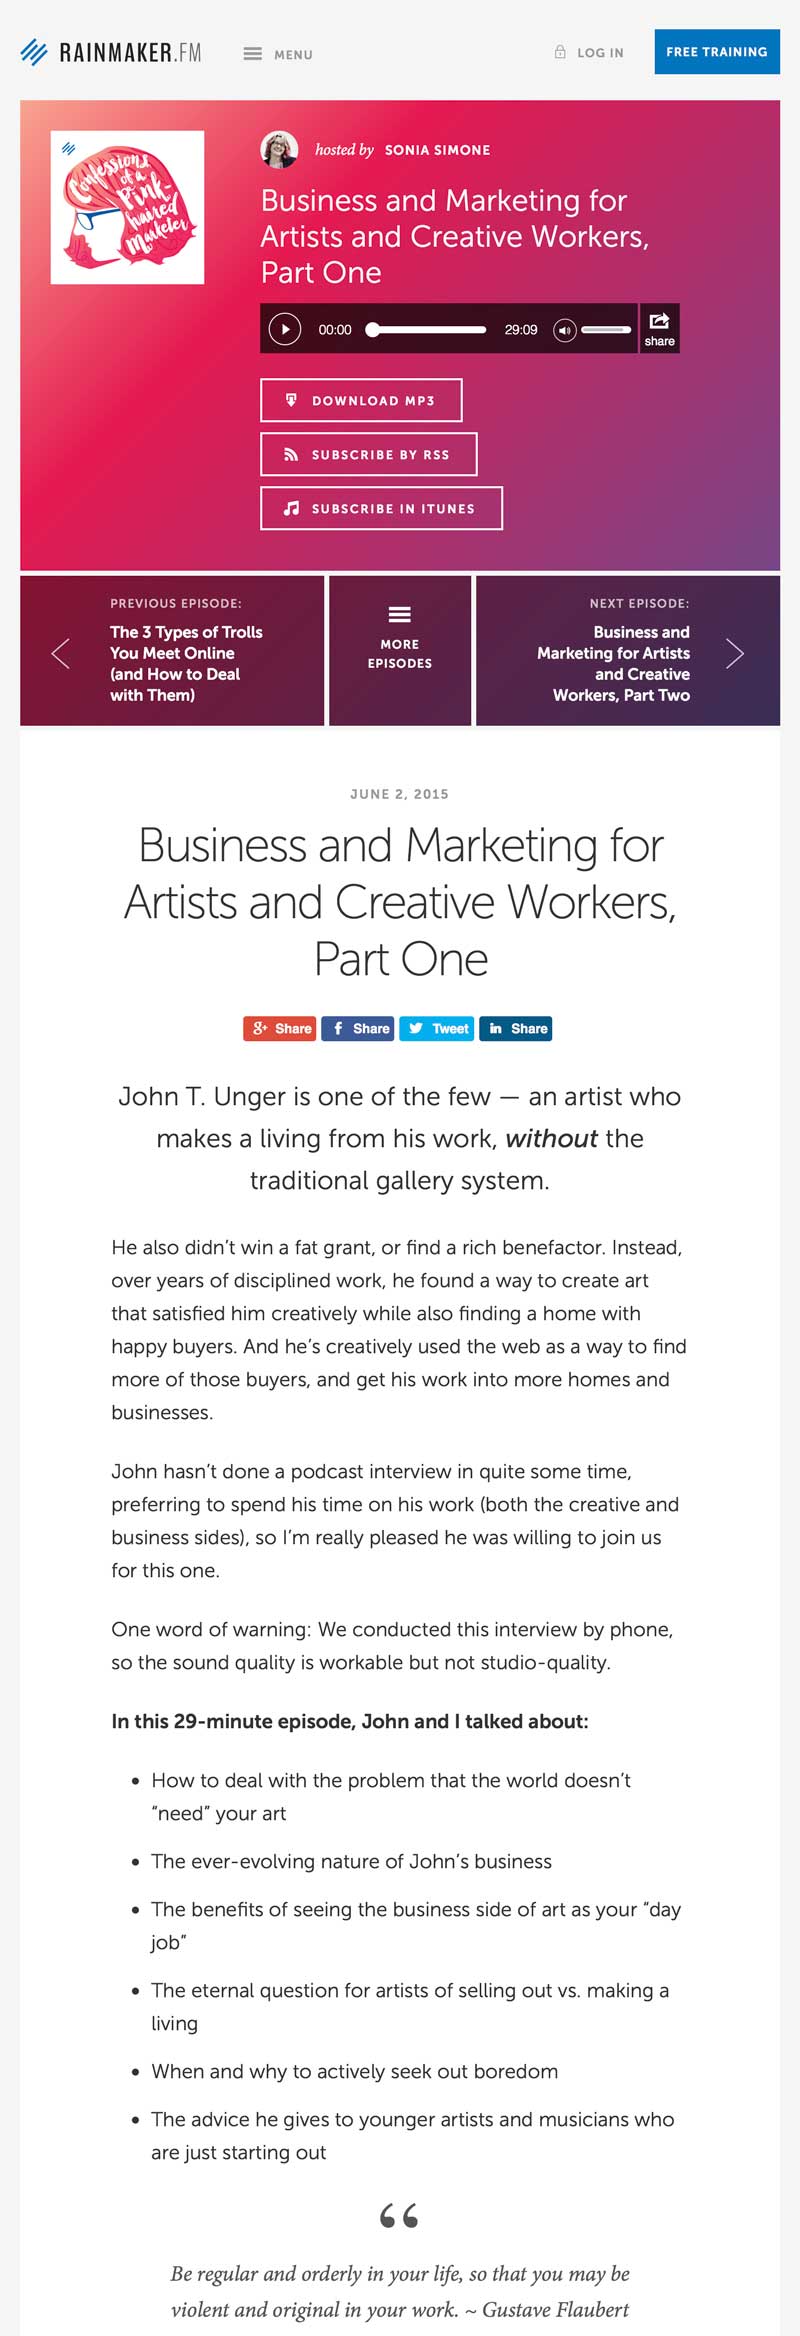 Simone, Sonia. “Business and Marketing for Artists and Creative Workers, Part One.” The Confessions of a Pink-Haired Marketer, Rainmaker.FM